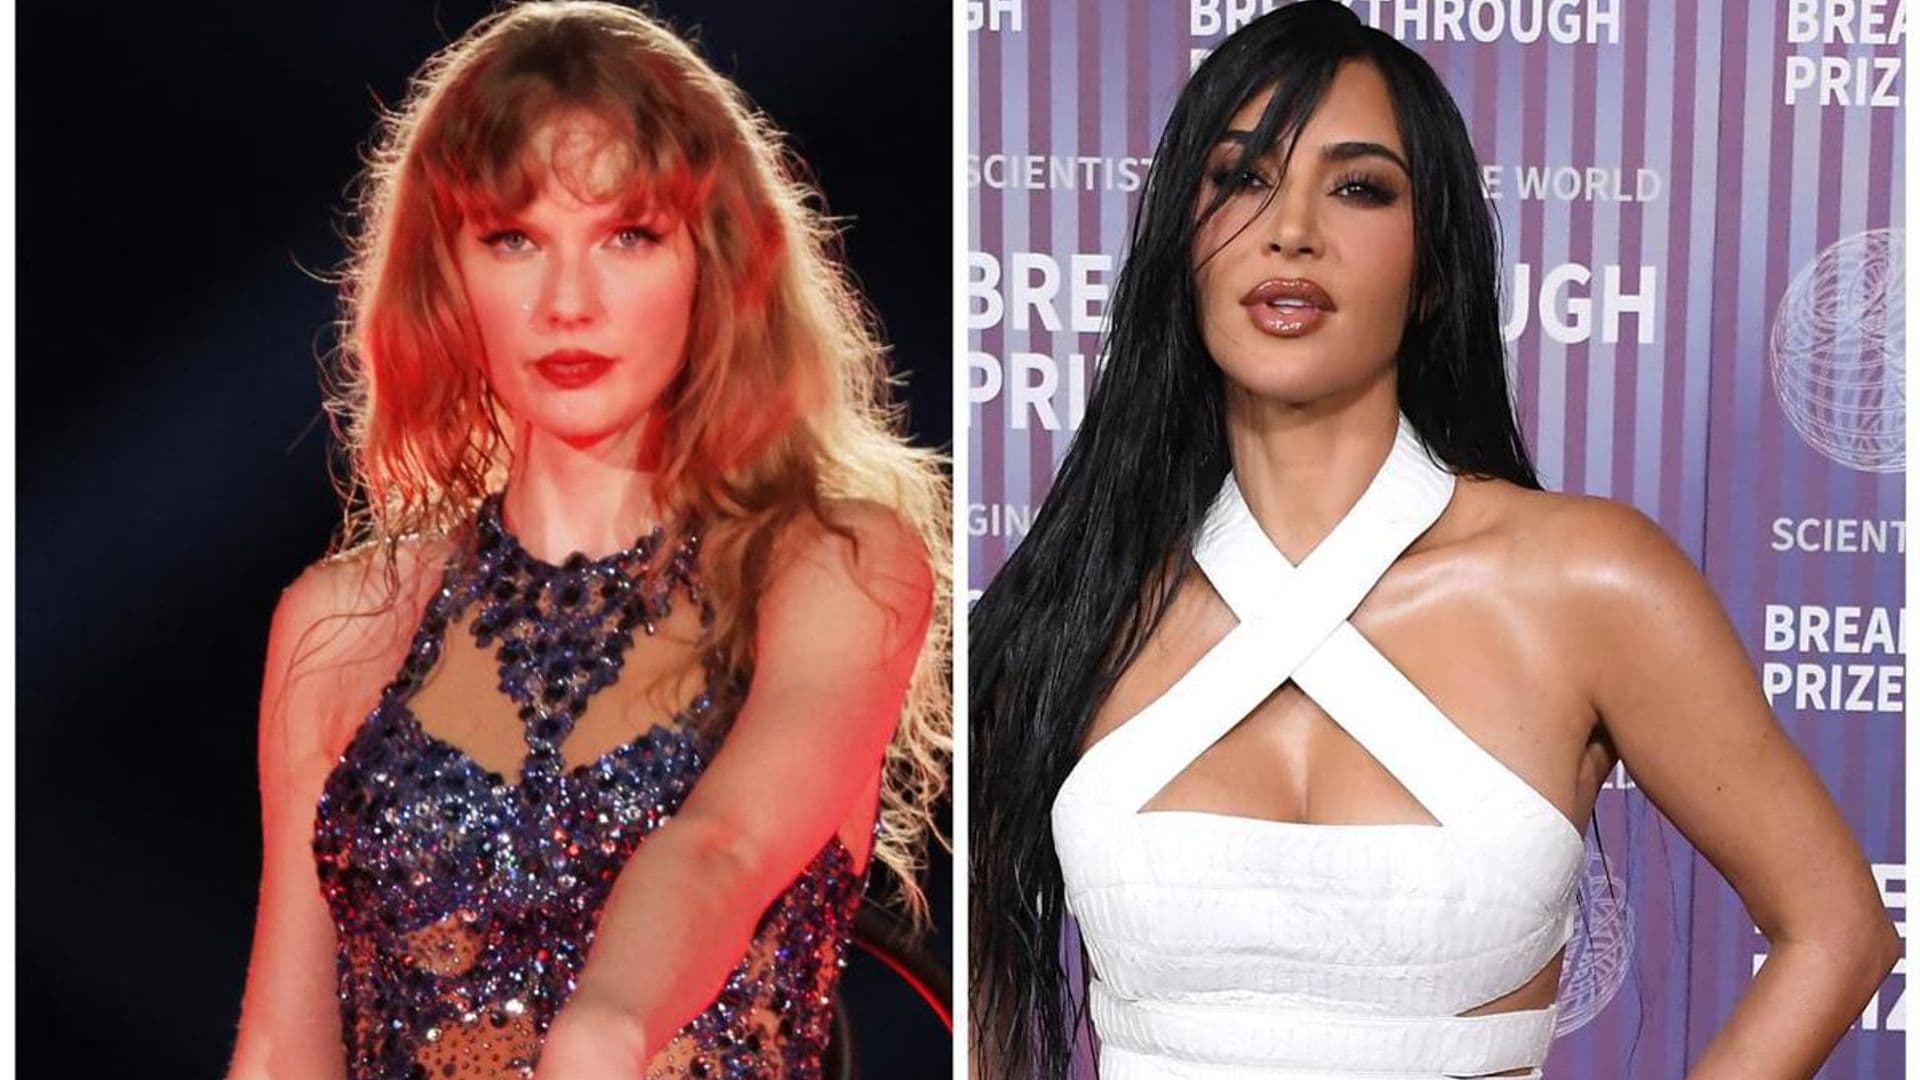 Is Taylor Swift singing about Kim Kardashian in two of her new songs?